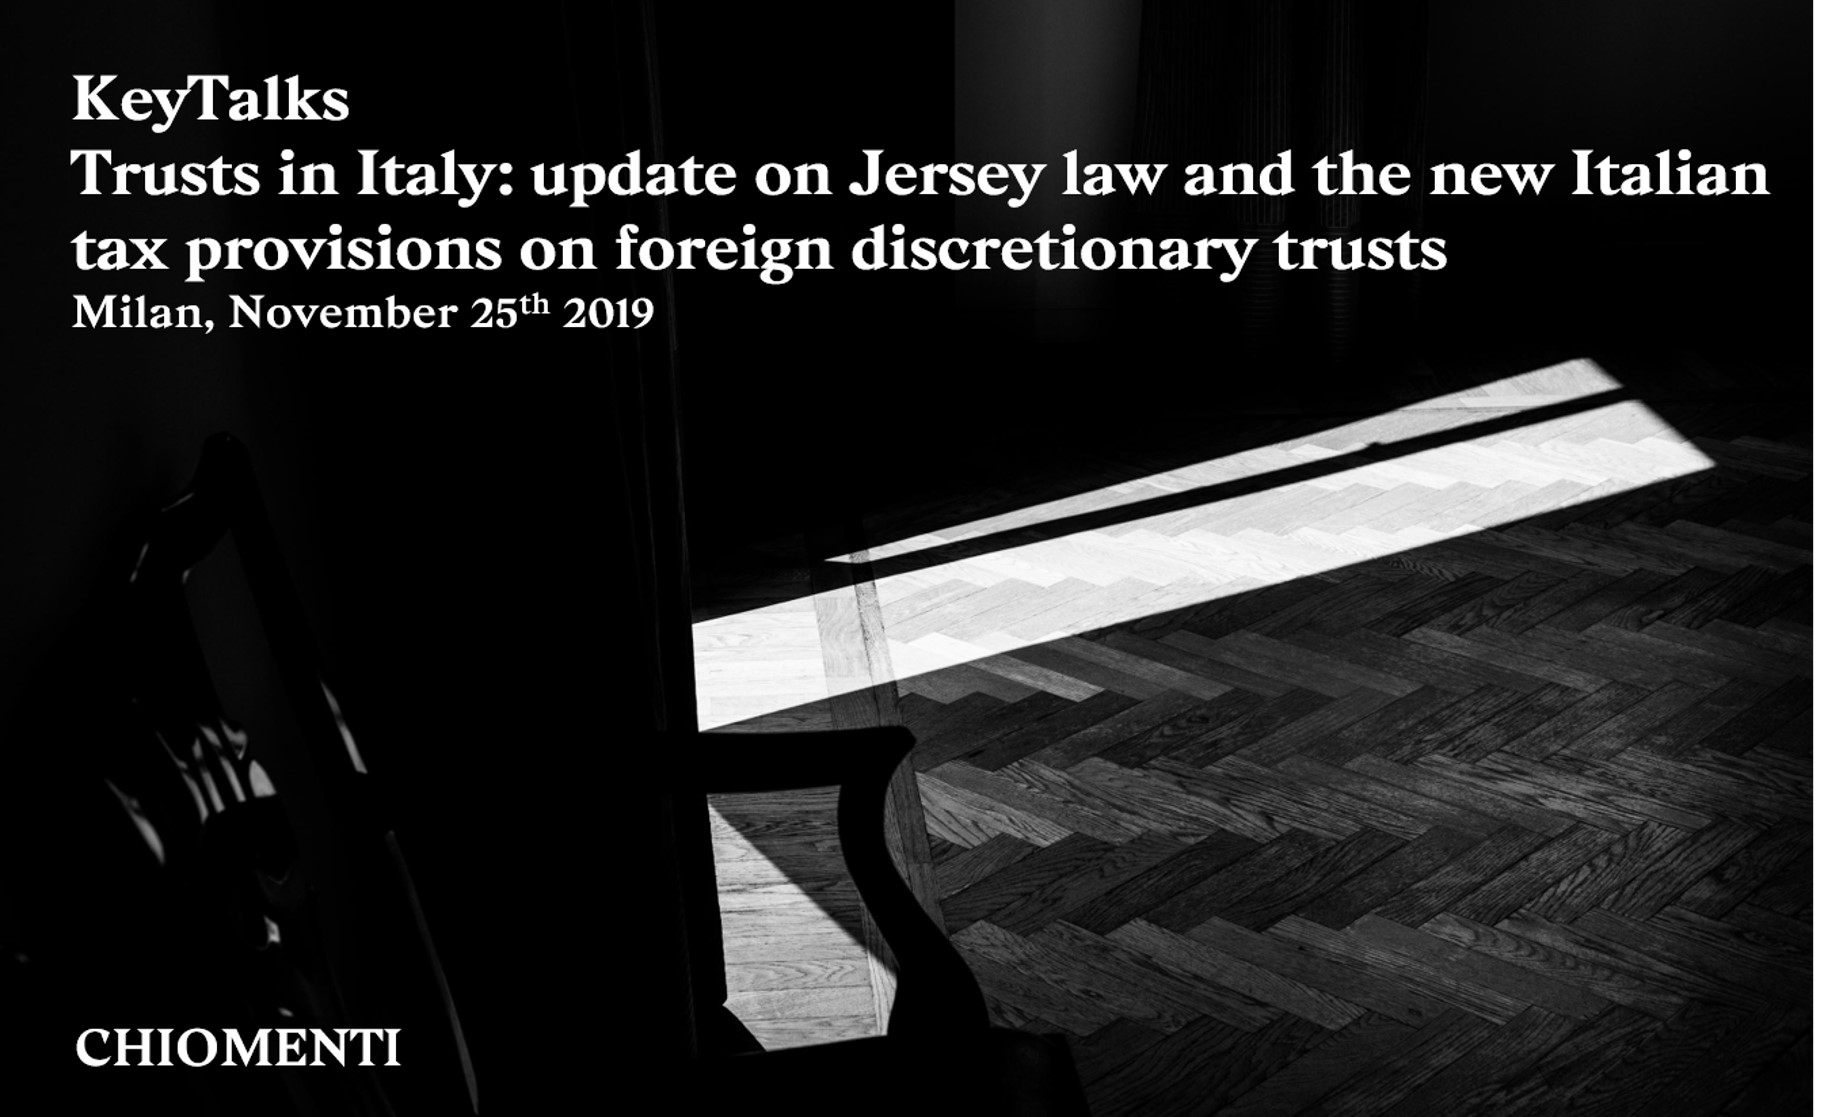 Key Talks “Trusts in Italy: update on Jersey law and the new Italian tax provisions on foreign discretionary trusts” – 25 November 2019, Milan